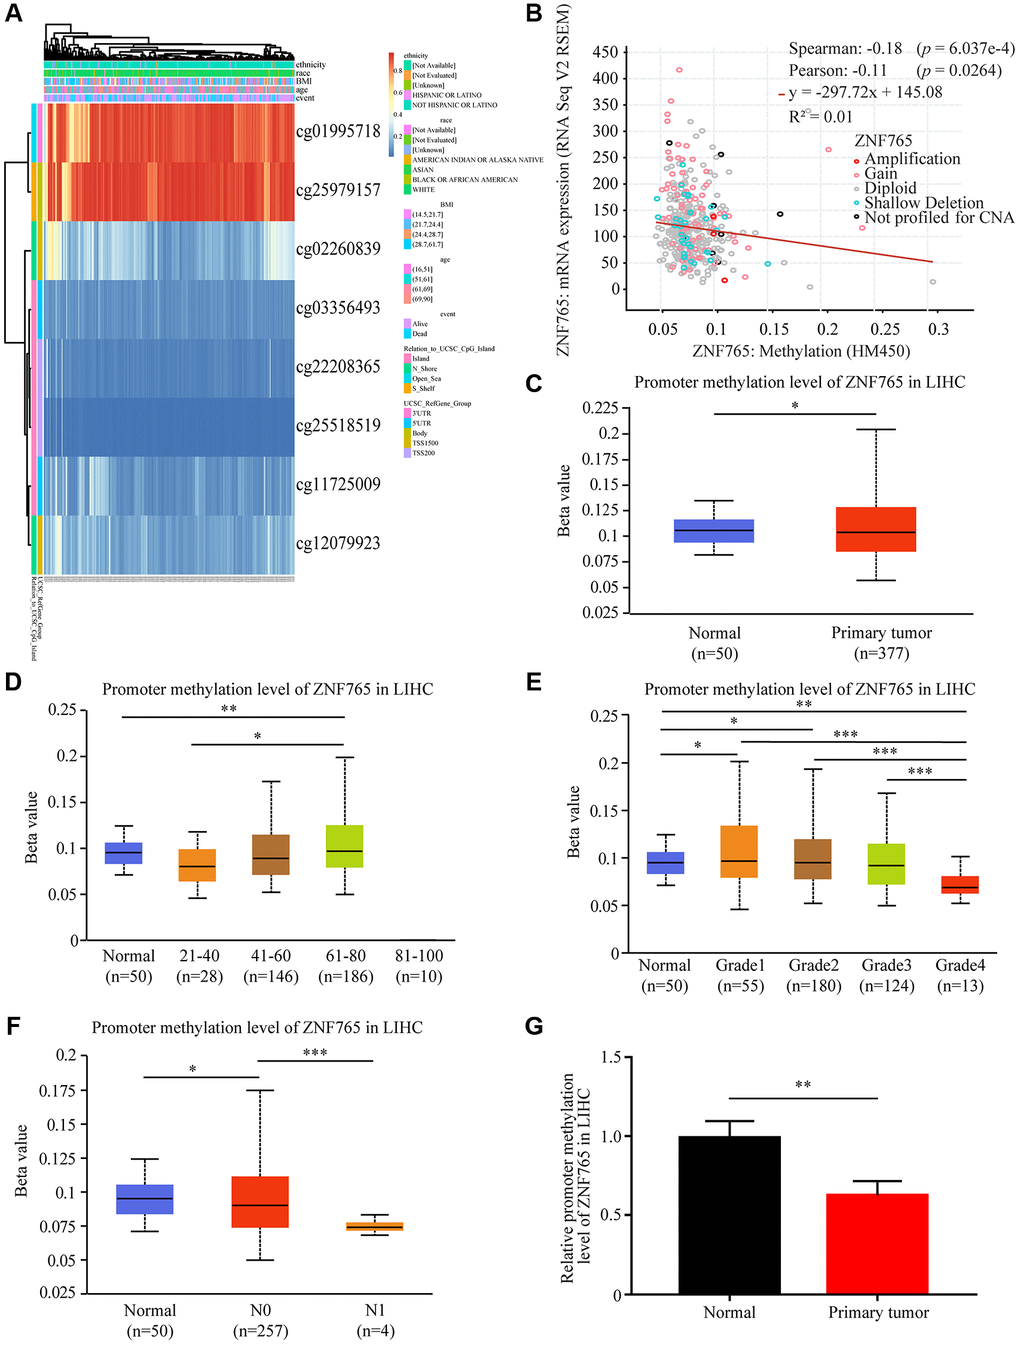 DNA methylation of ZNF765 in HCC. (A) Heatmap for ZNF765 in HCC. (B) The correlation between ZNF765 methylation and its expression level (n = 521). (C) A boxplot of ZNF765 promoter methylation levels in normal and HCC samples. (D) Boxplot demonstrating the relative promoter methylation level of ZNF765 in healthy people of any age or HCC patients aged 21–40, 41–60, 61–80, or 81–100 years. (E) A boxplot depicting the relative promoter methylation level of ZNF765 in healthy people and HCC patients of different genders. (F) Boxplot showing the relative promoter methylation level of ZNF765 in normal individuals or HCC patients in grades 1, 2, 3, or 4. (G) Boxplot depicting the relative promoter methylation level of ZNF765 in normal individuals with any nodal metastasis status or HCC patients with N0 and N1 nodal metastasis. ***p 